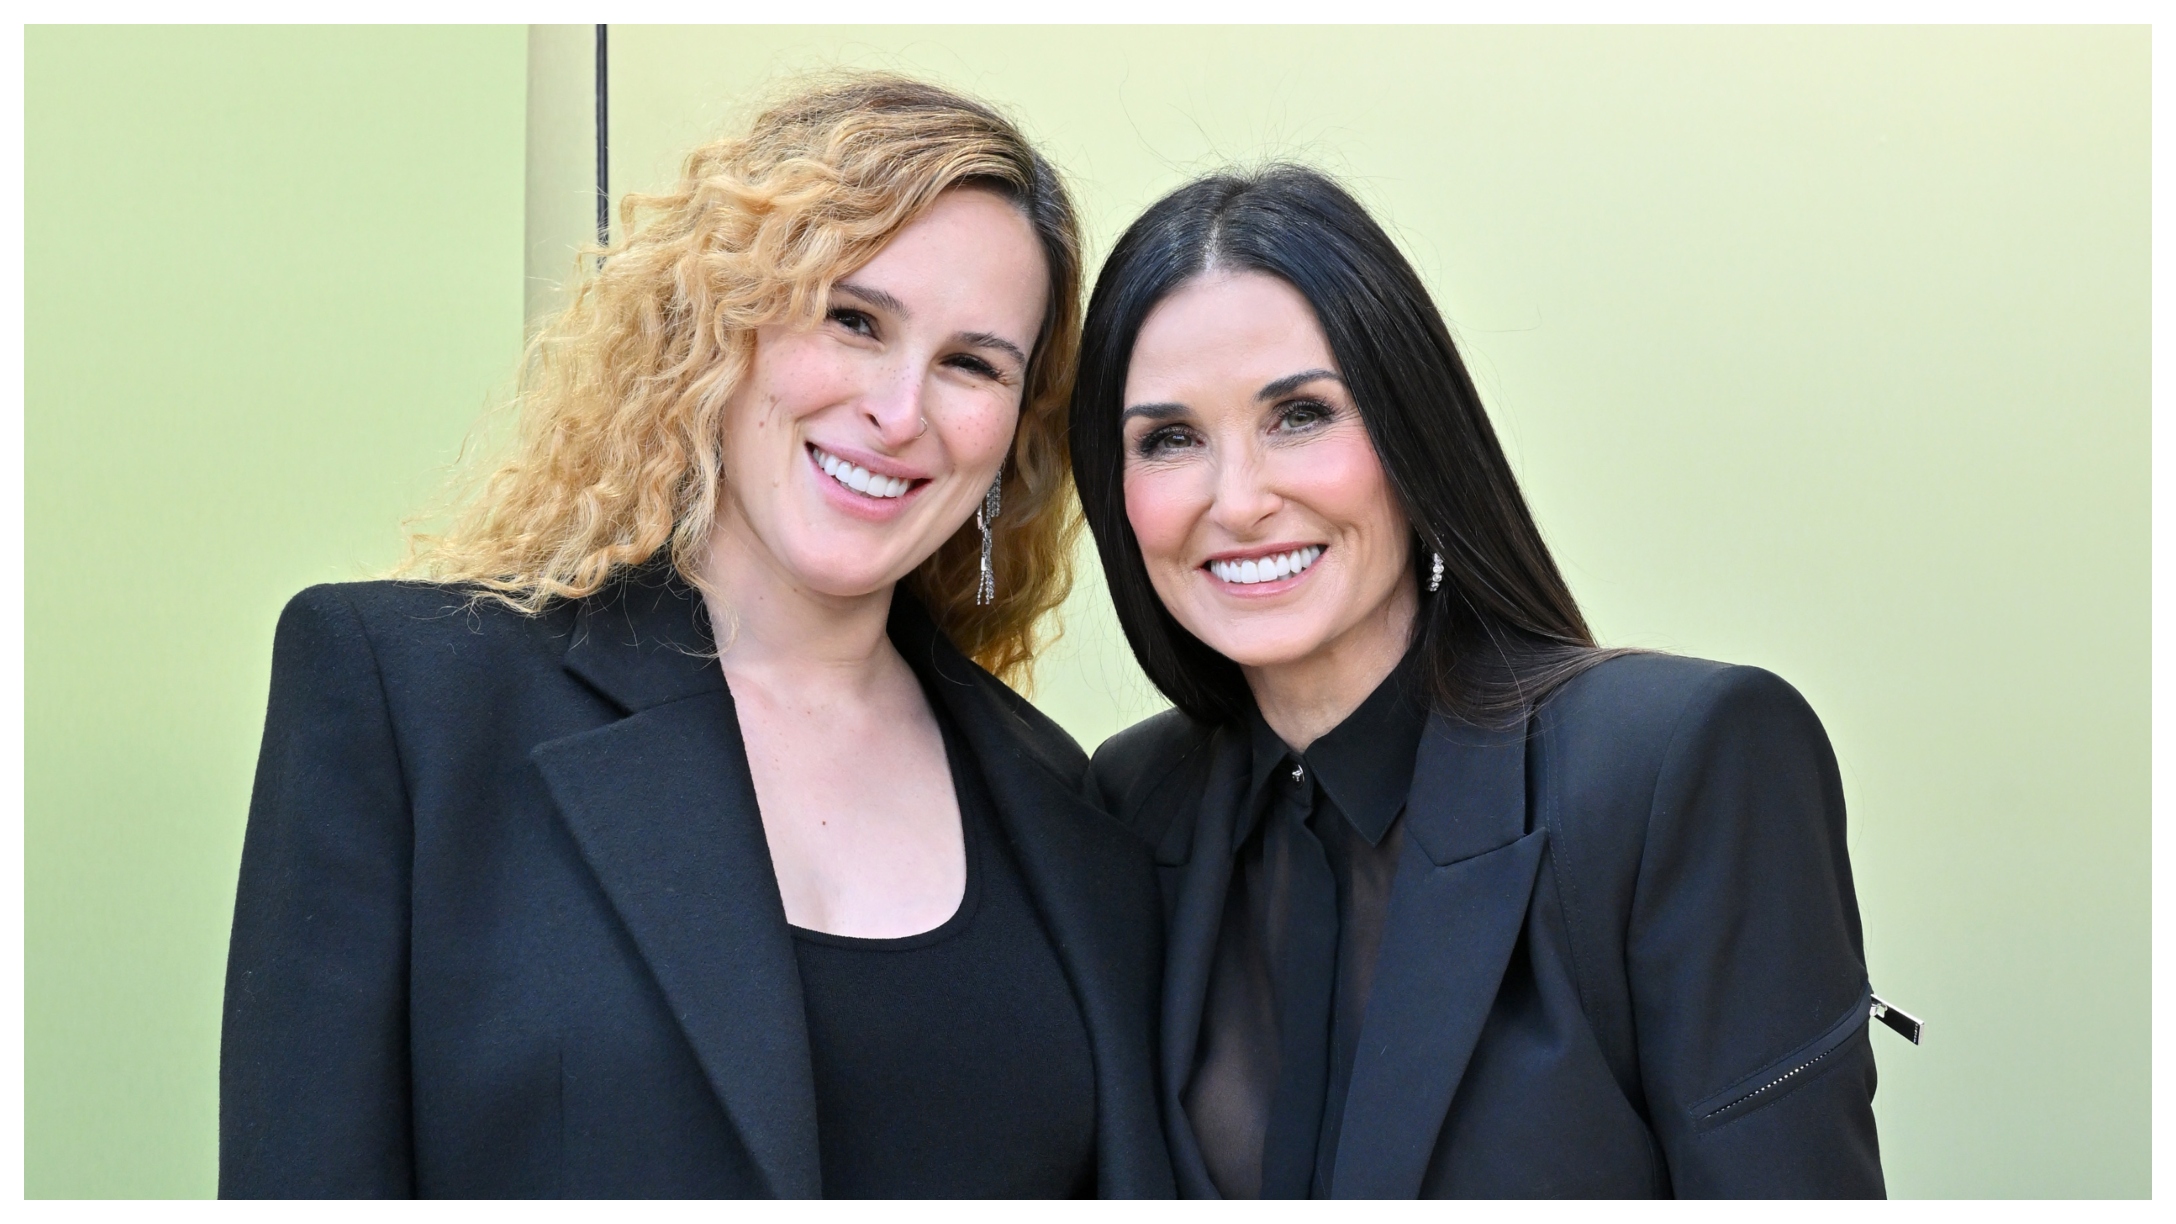 Rumer Willis Shares Intimate Photos Of Her Mother Helping Her Through Her Home Birth